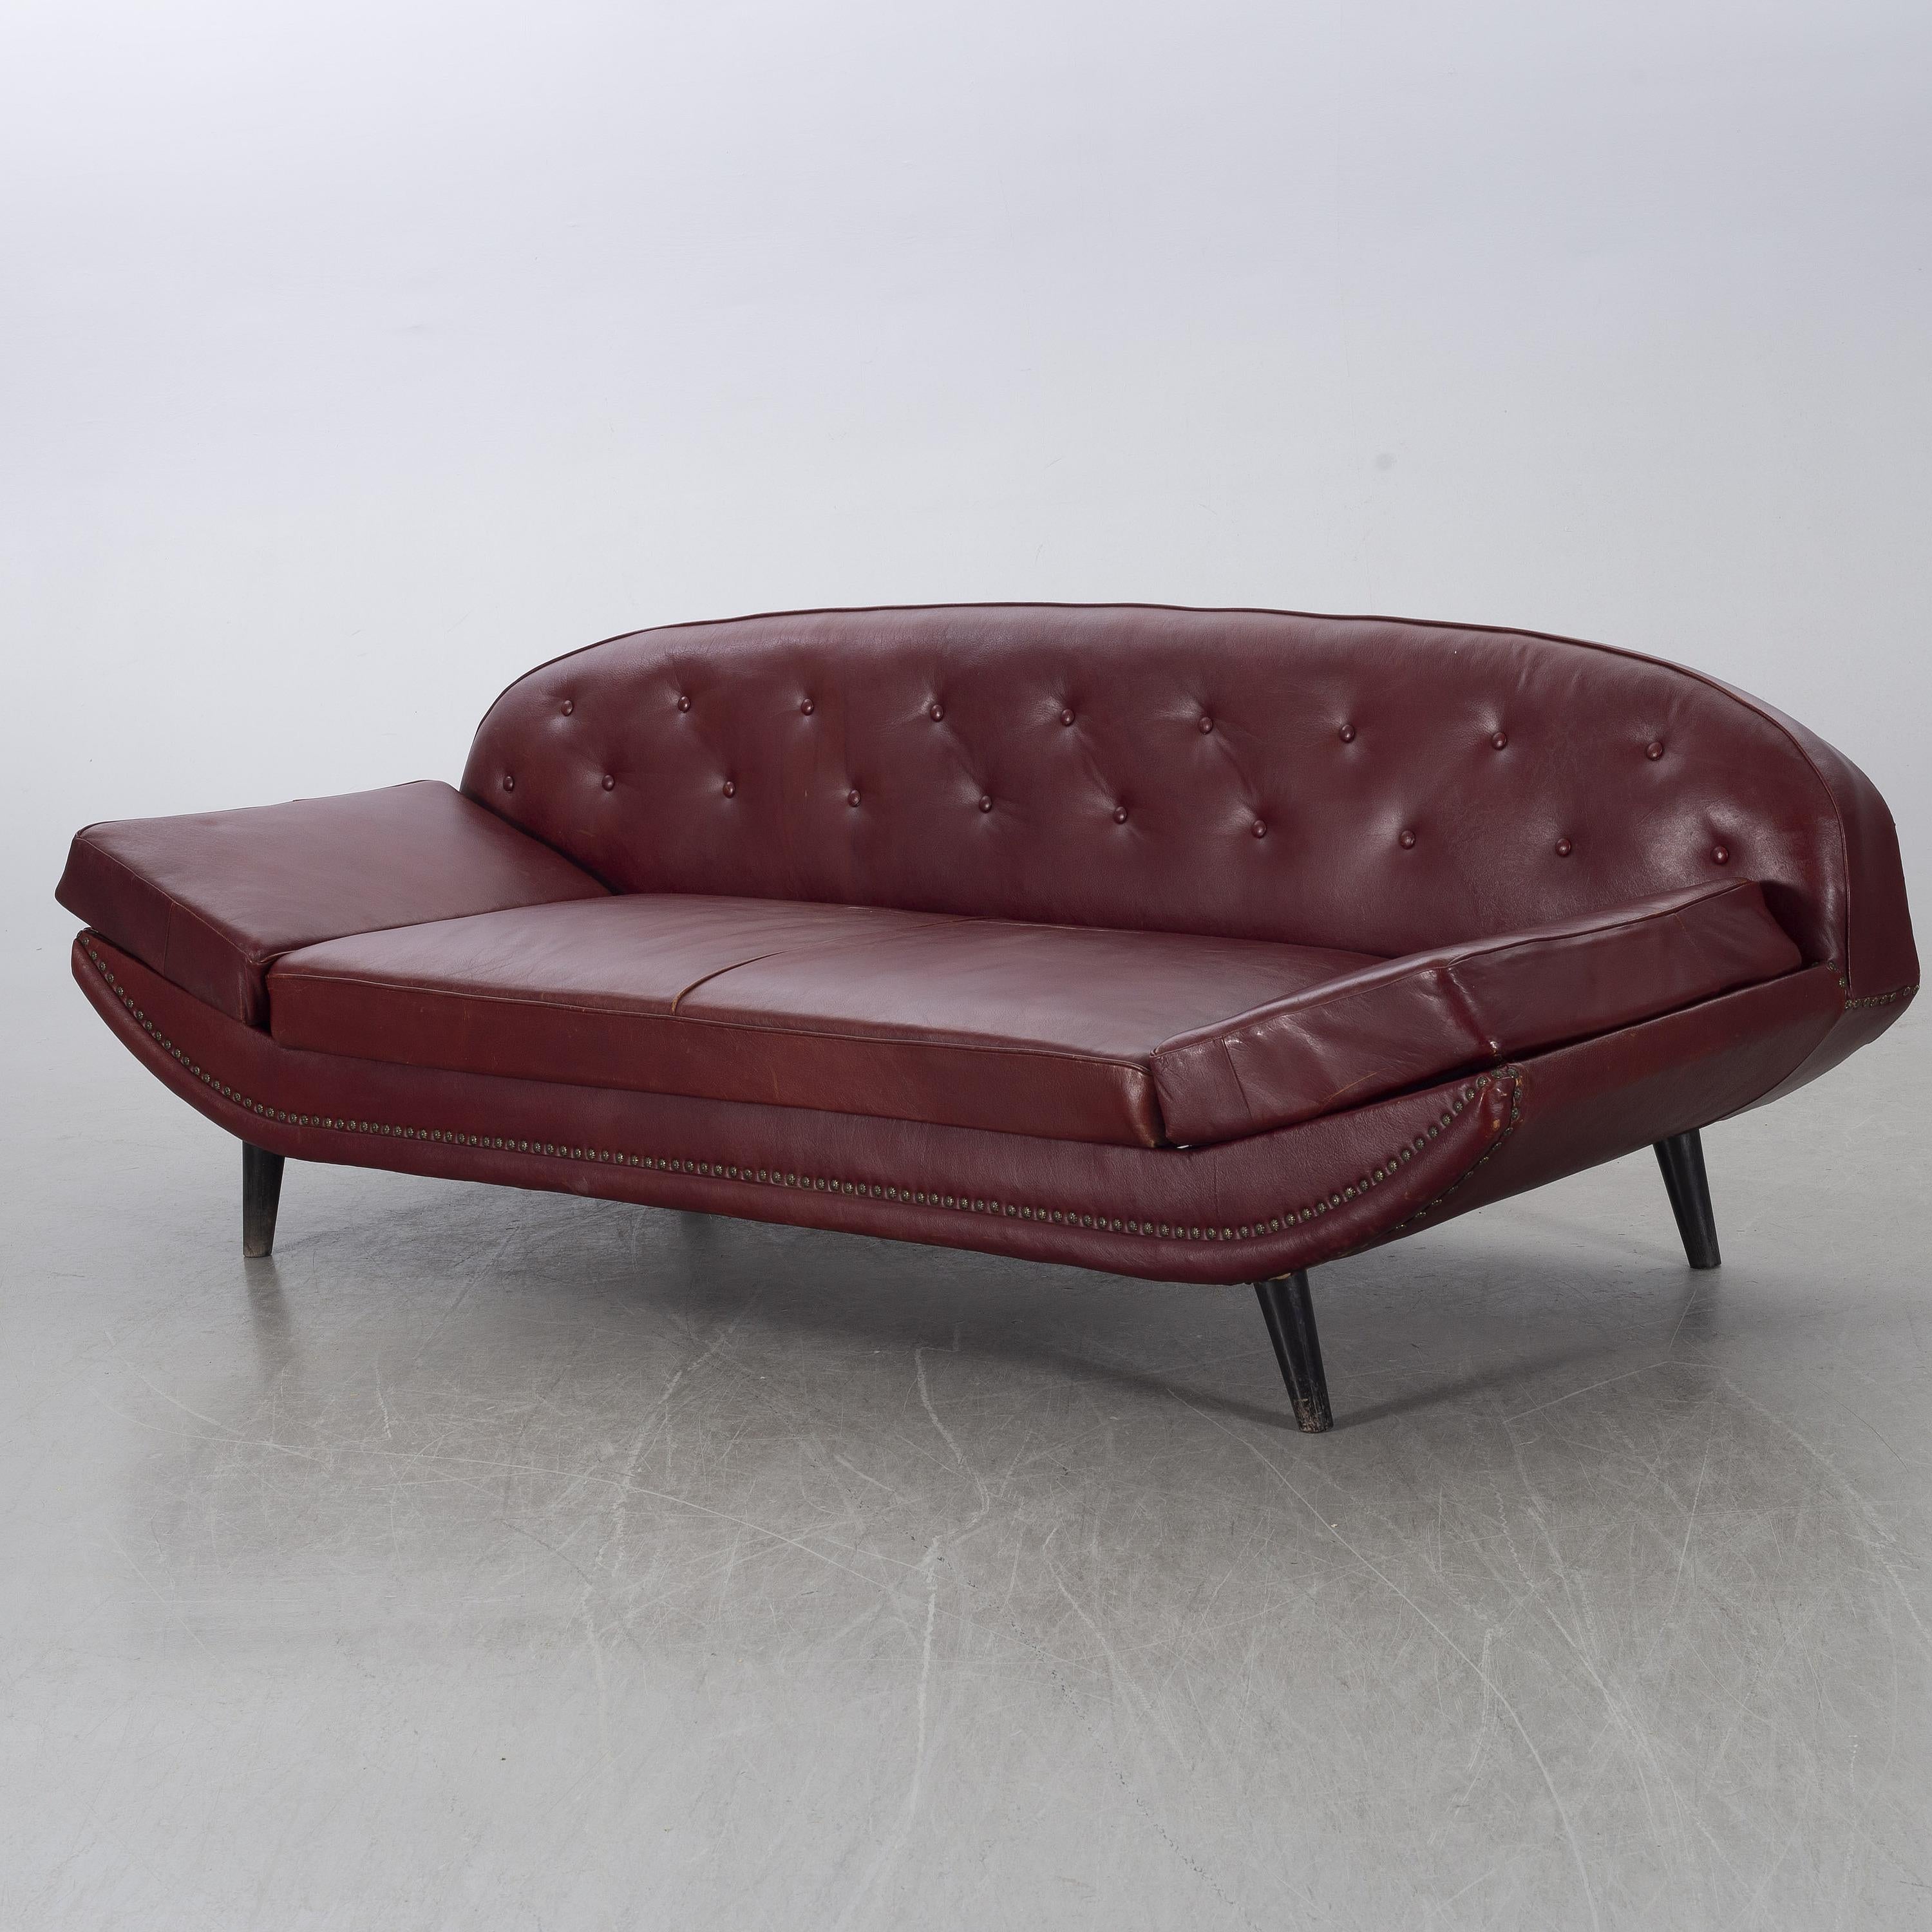 A rare Folke Jansson sofa or daybed produced by SM Wincrantz in Sweden, 1950s. In good structural condition. Signs of wear to vinyl fabric which is why recovering is recomended. If you would like assistance with recovering in your choice of material